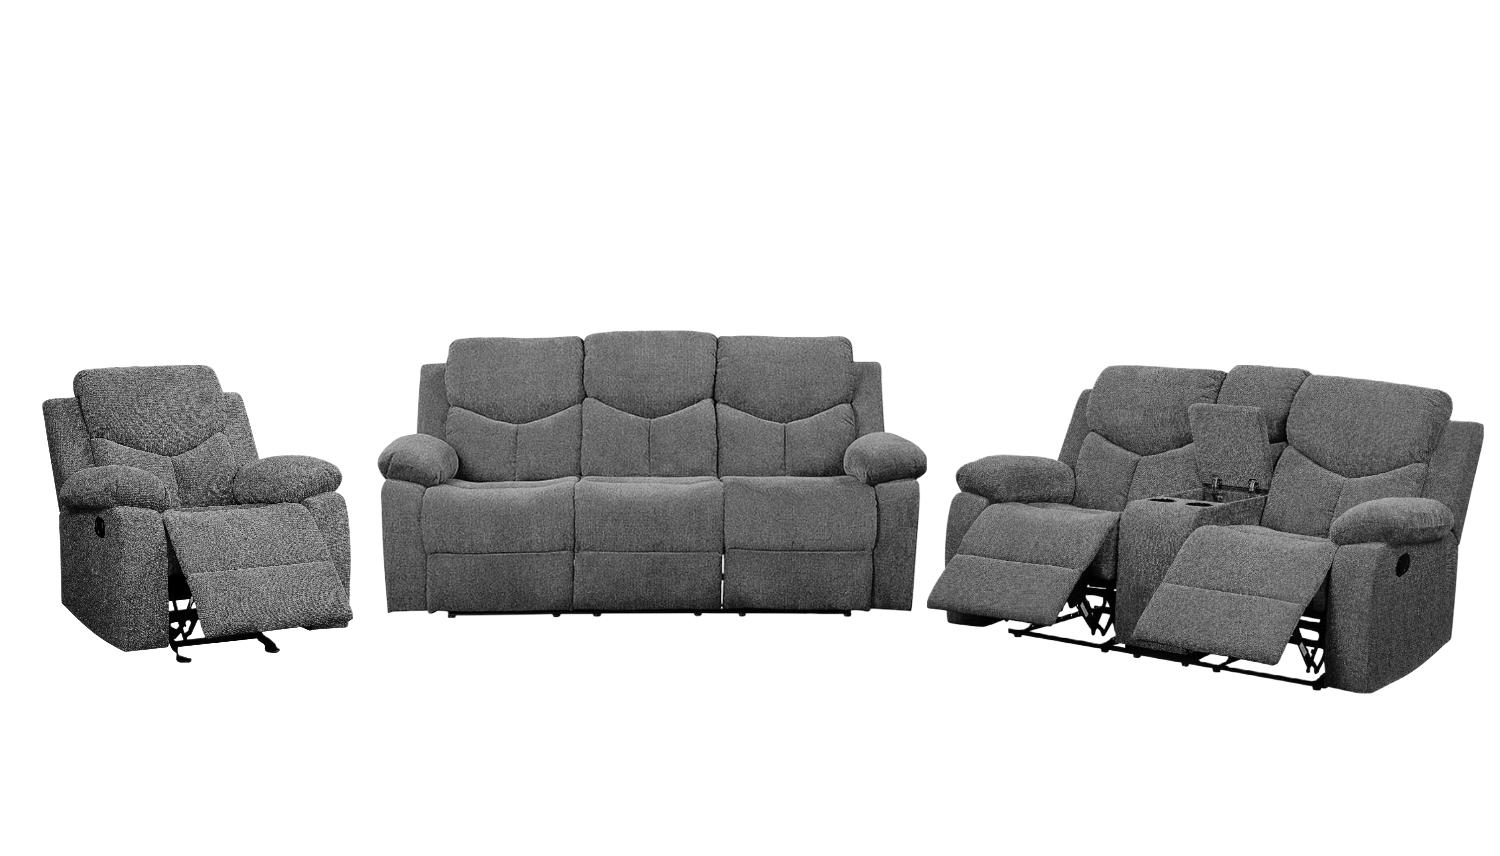 Contemporary Sofa Loveseat and Recliner Kalen 55440-3pcs in Gray Chenille